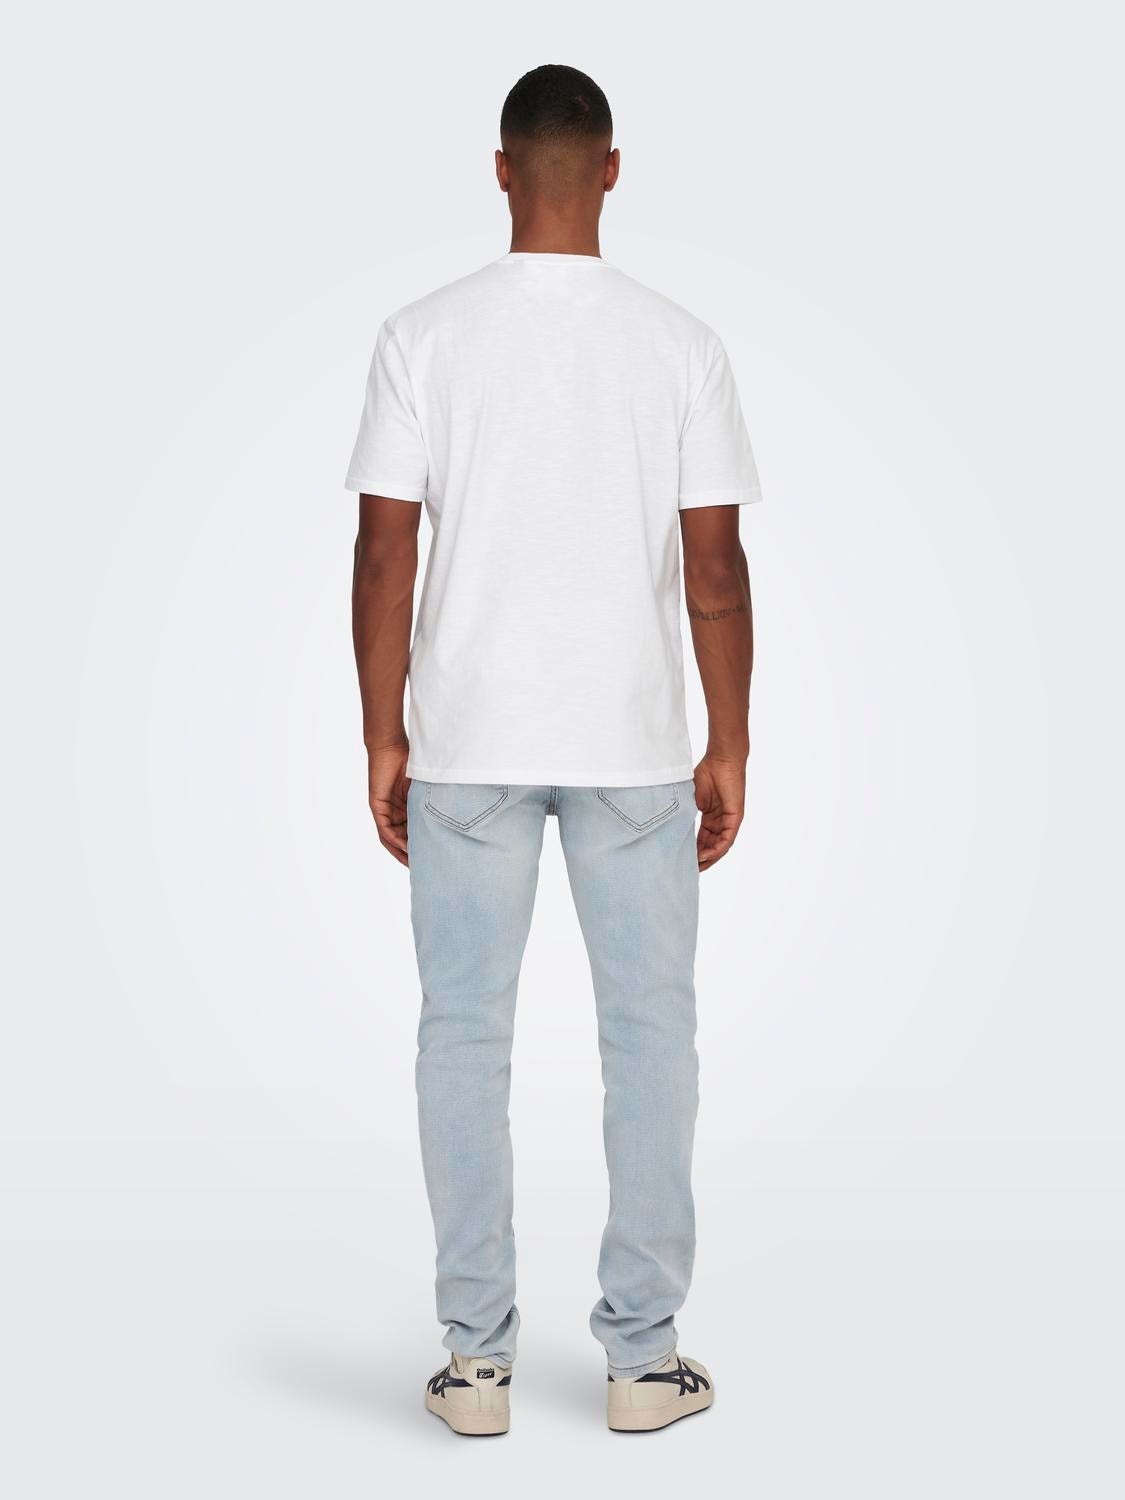 ONLY & SONS O-hals t-shirt -White - 22020074